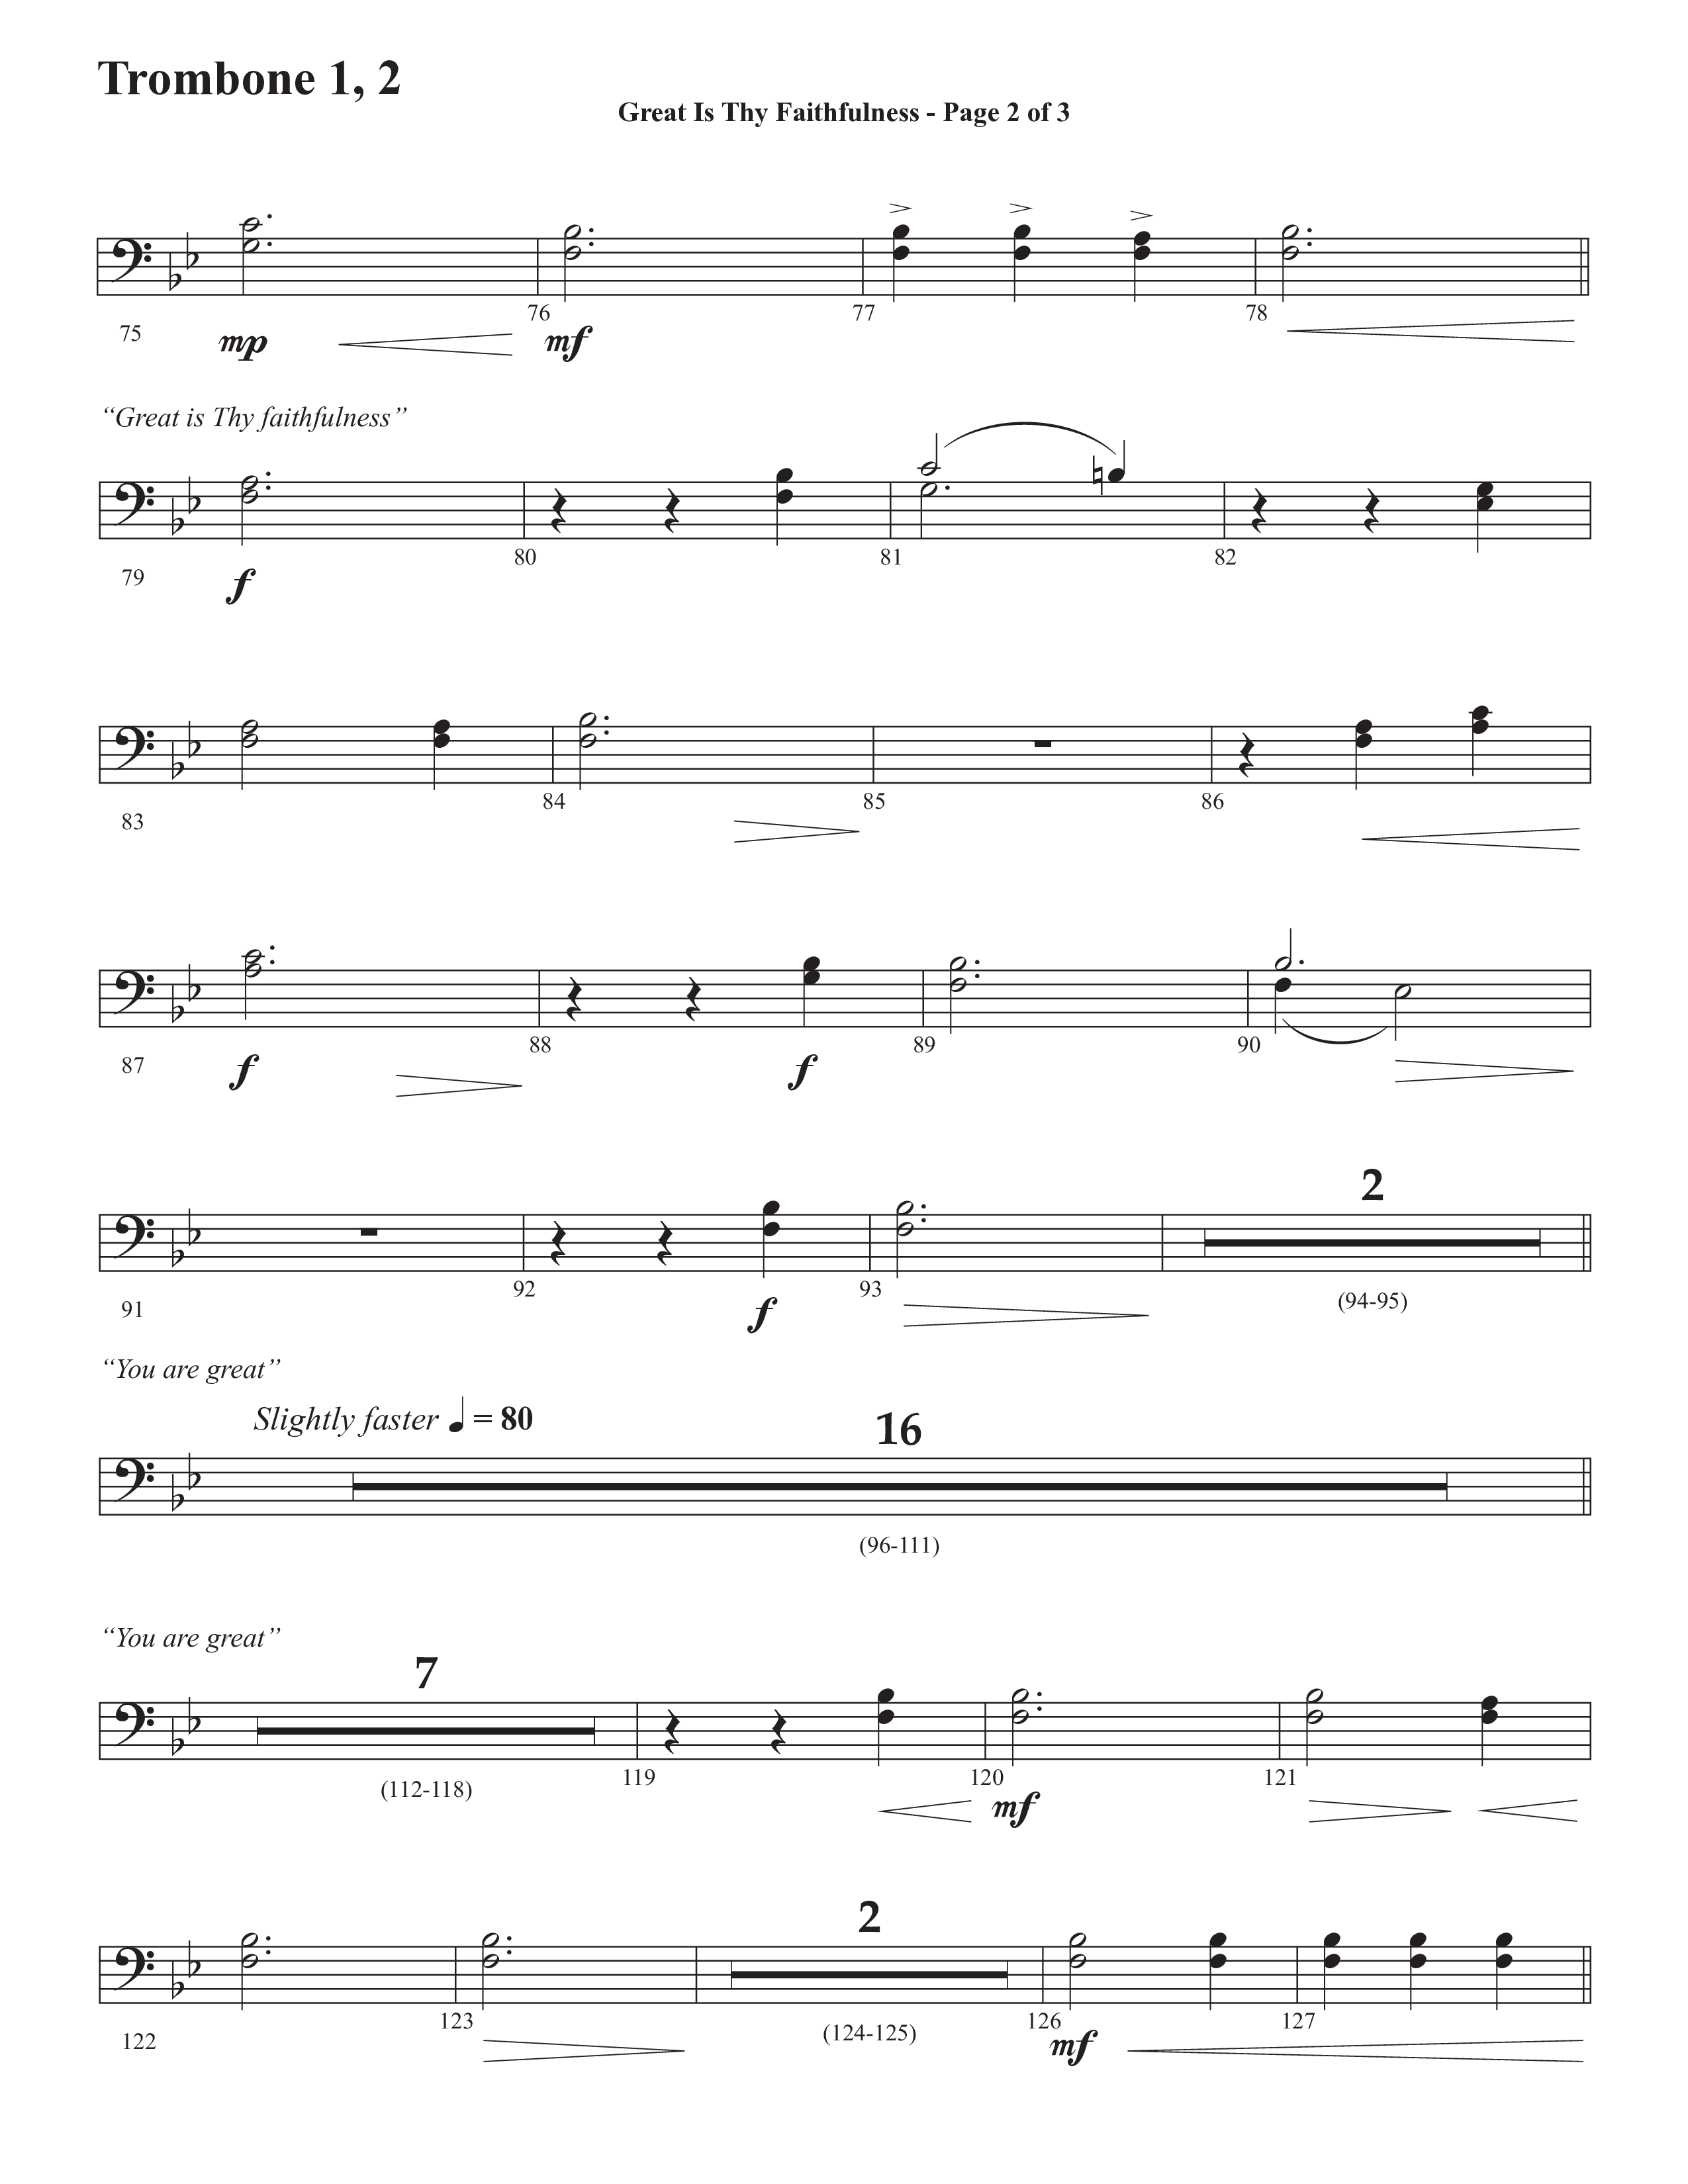 Great Is Thy Faithfulness (You Are Great) (Choral Anthem SATB) Trombone 1/2 (Semsen Music / Arr. John Bolin / Orch. David Shipps)